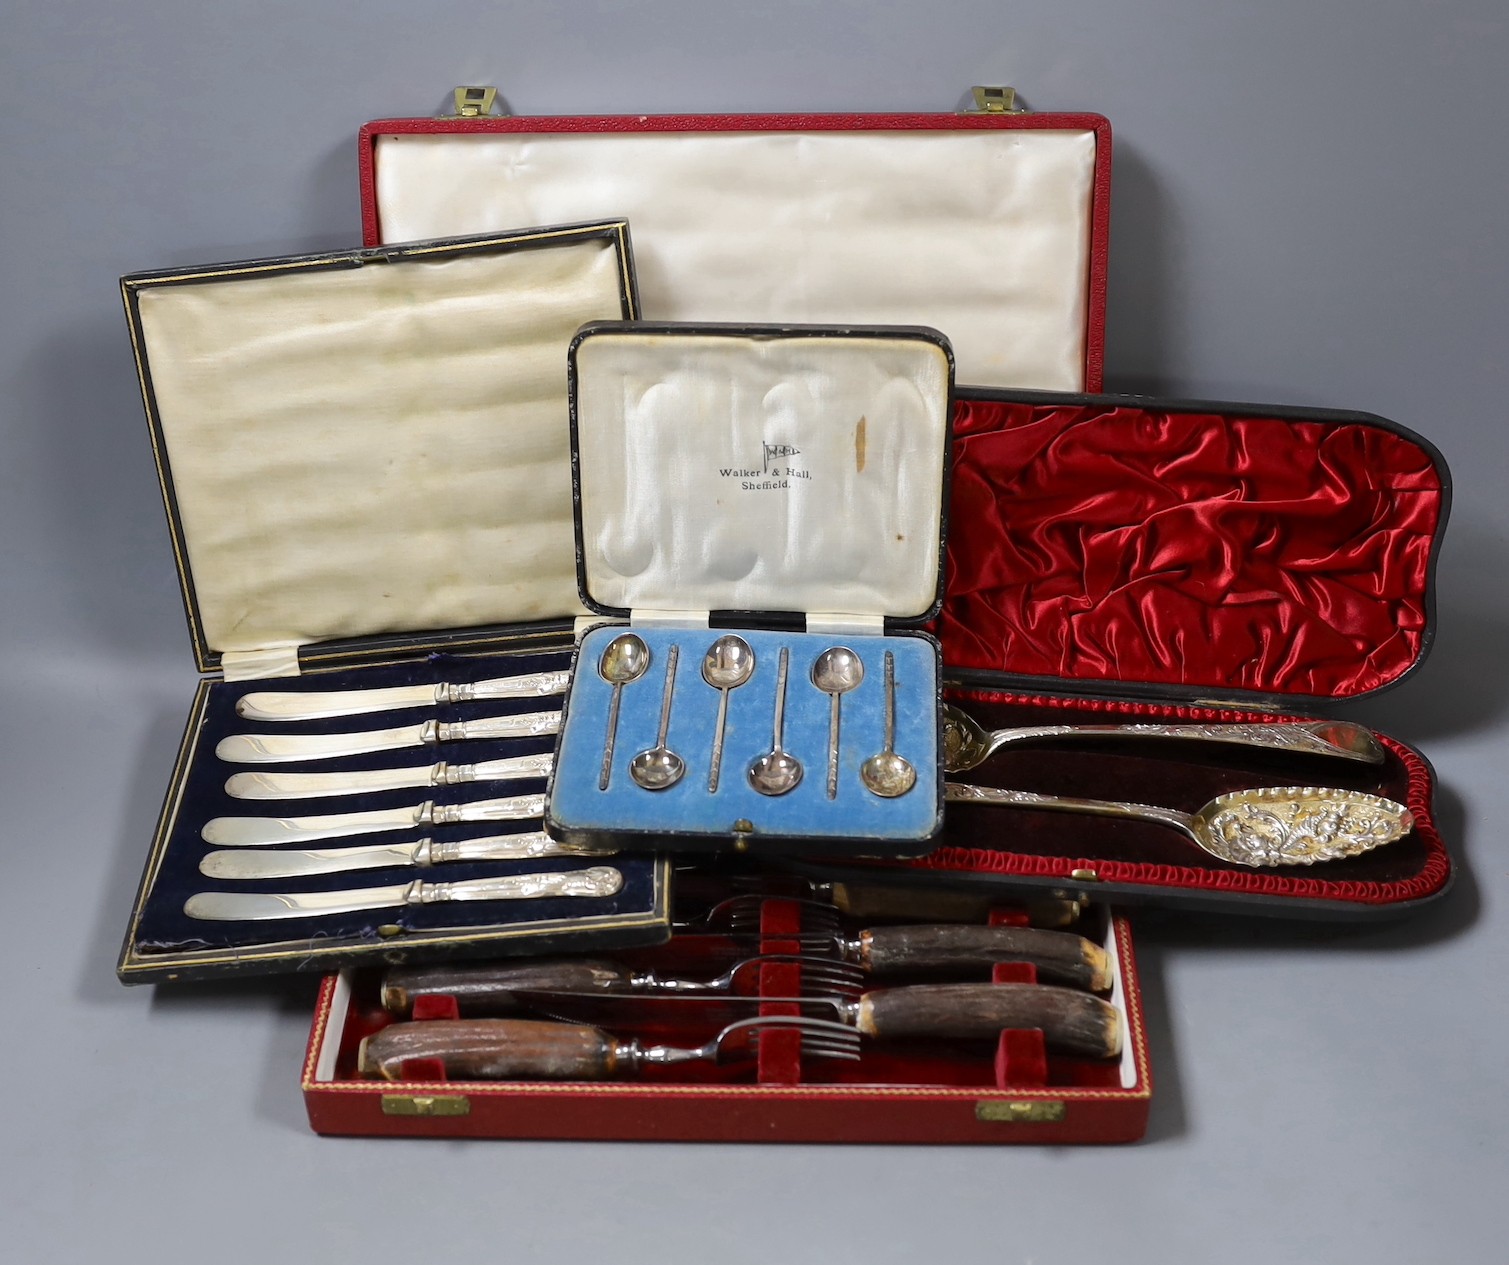 Four cased sets of flatware, including silver 'berry spoons', tea knives, teaspoons and horn handles knives and forks.